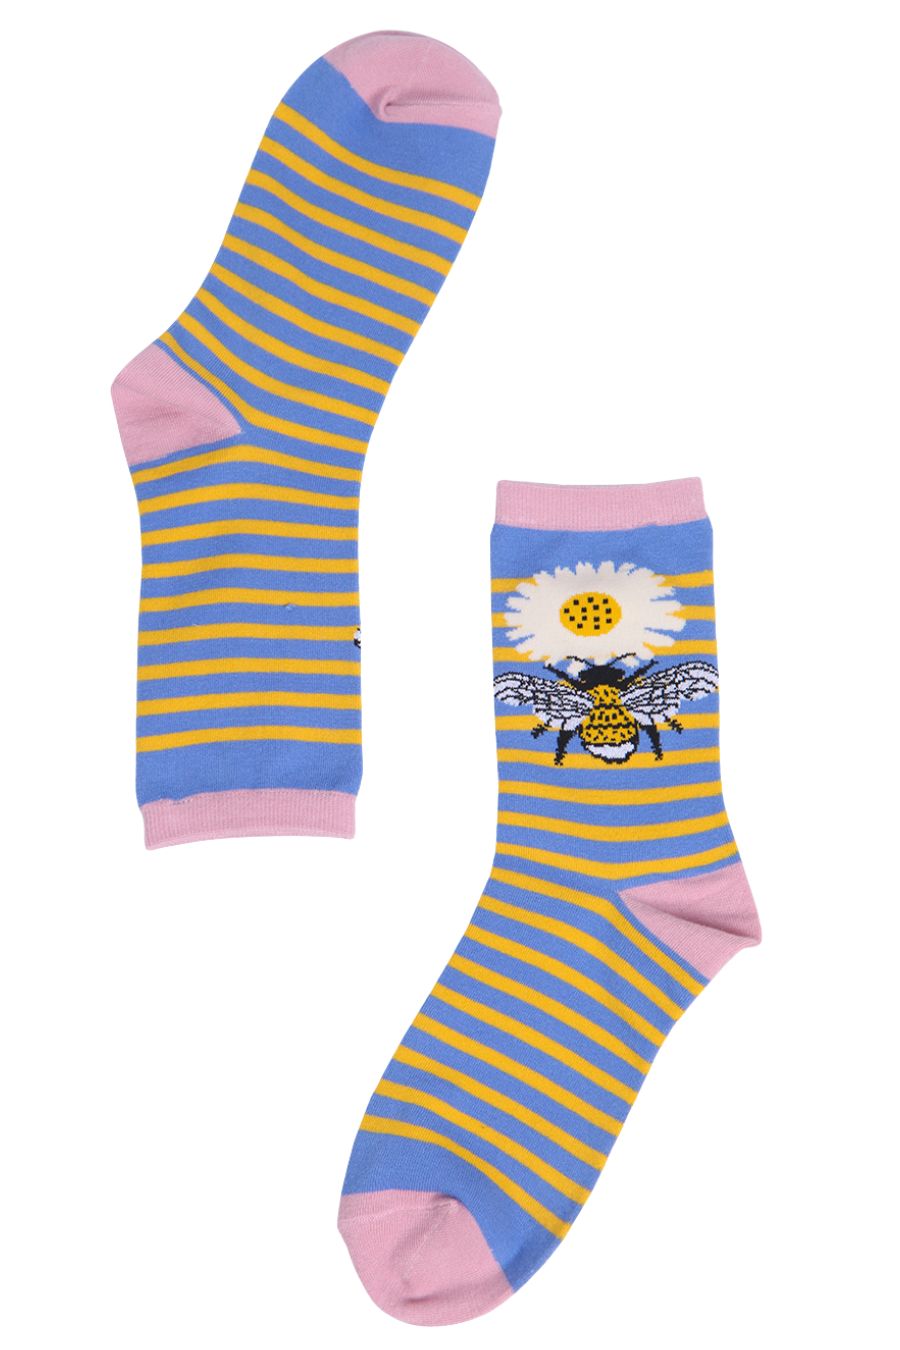 Womens Bamboo Socks Bumble Bee Striped Floral Ankle Socks